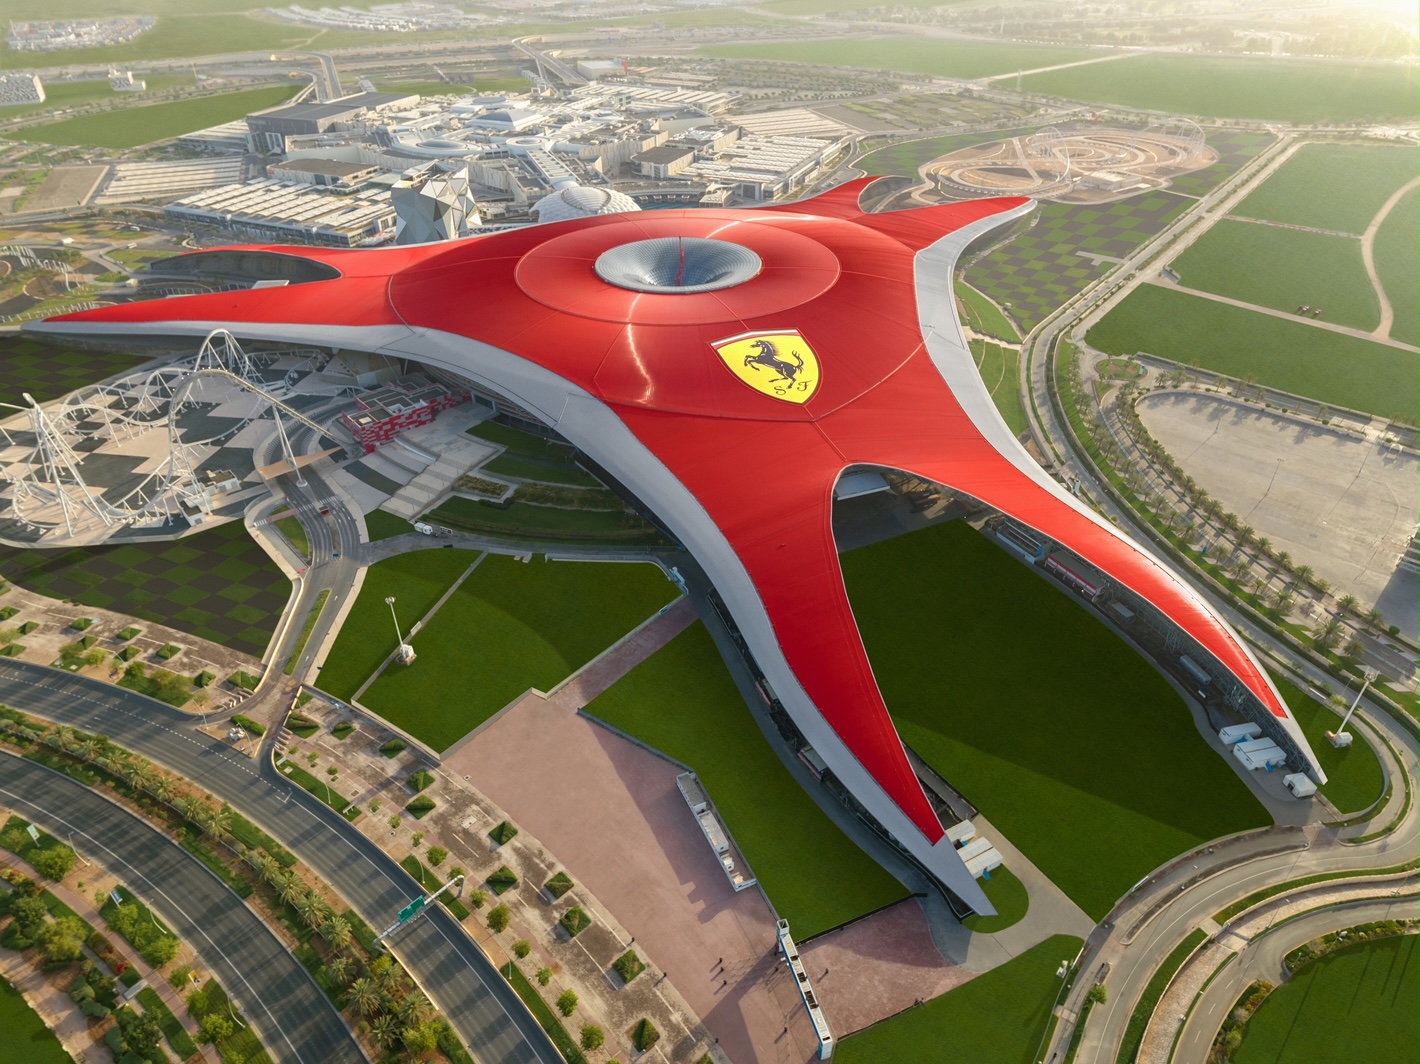 Celebrate Ferrari World Abu Dhabi’s 11th Year Anniversary This Weekend With Festive Activities And Experiences